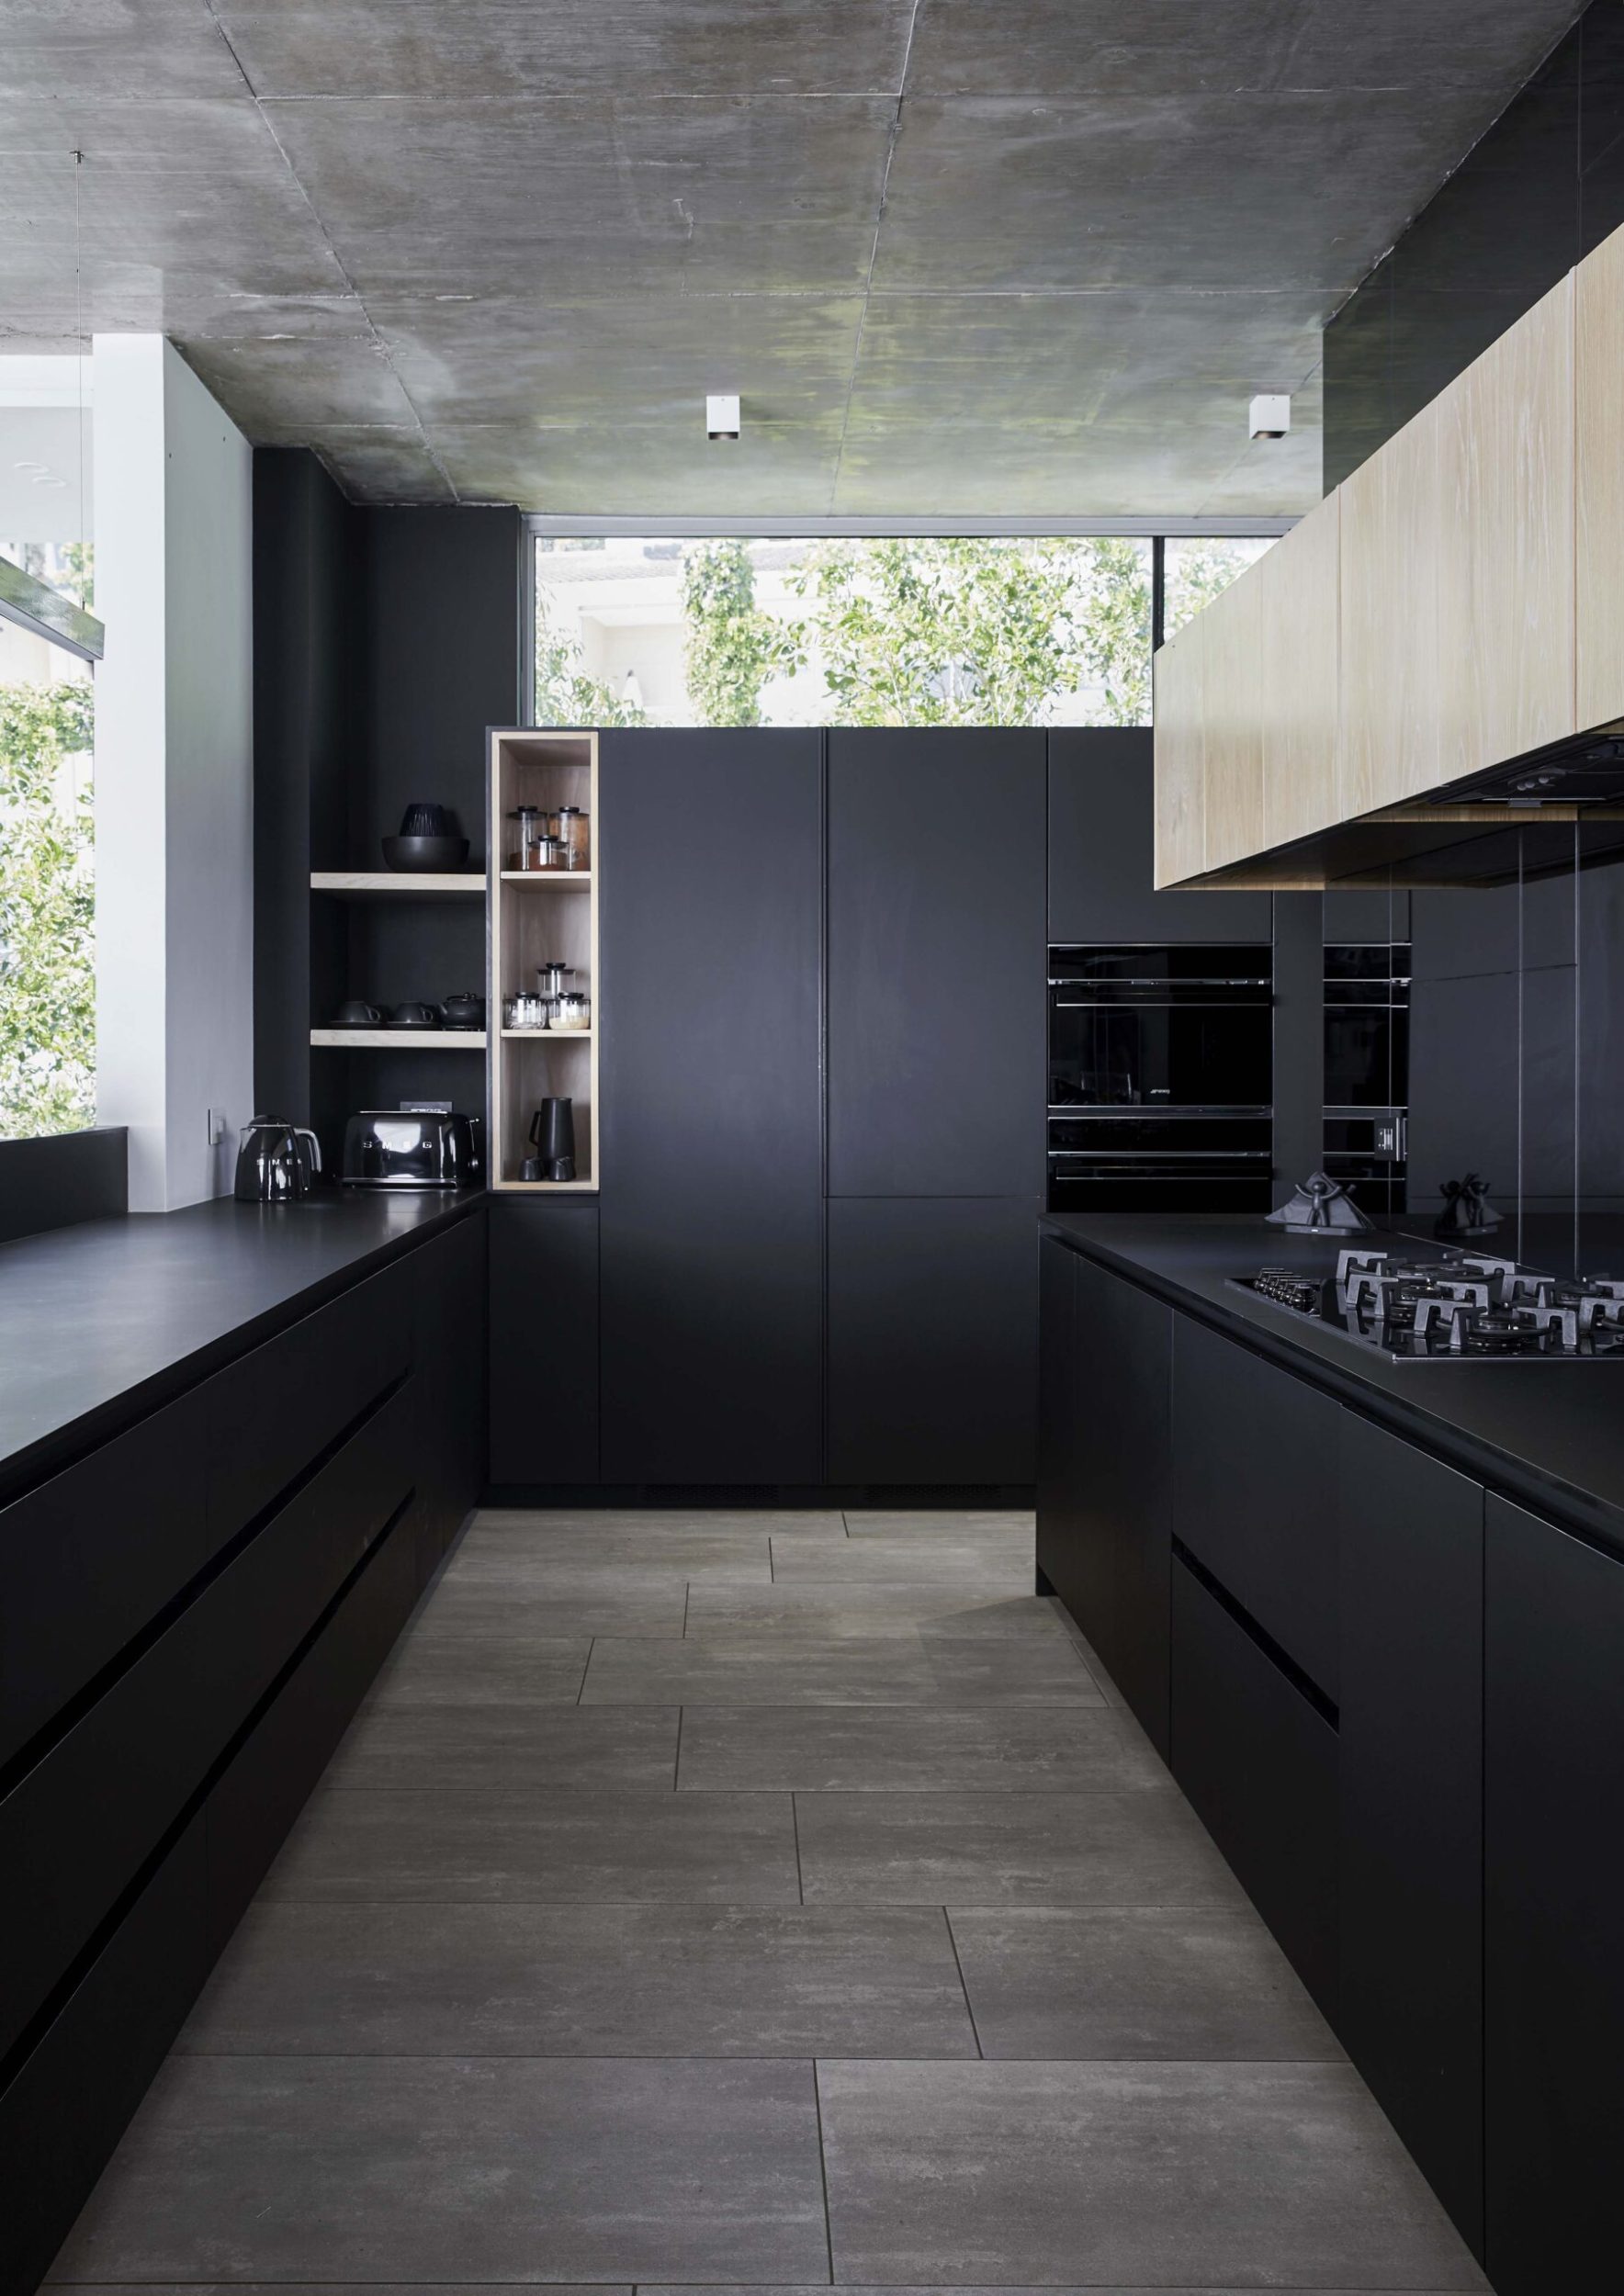 A black kitchen with light wood floors